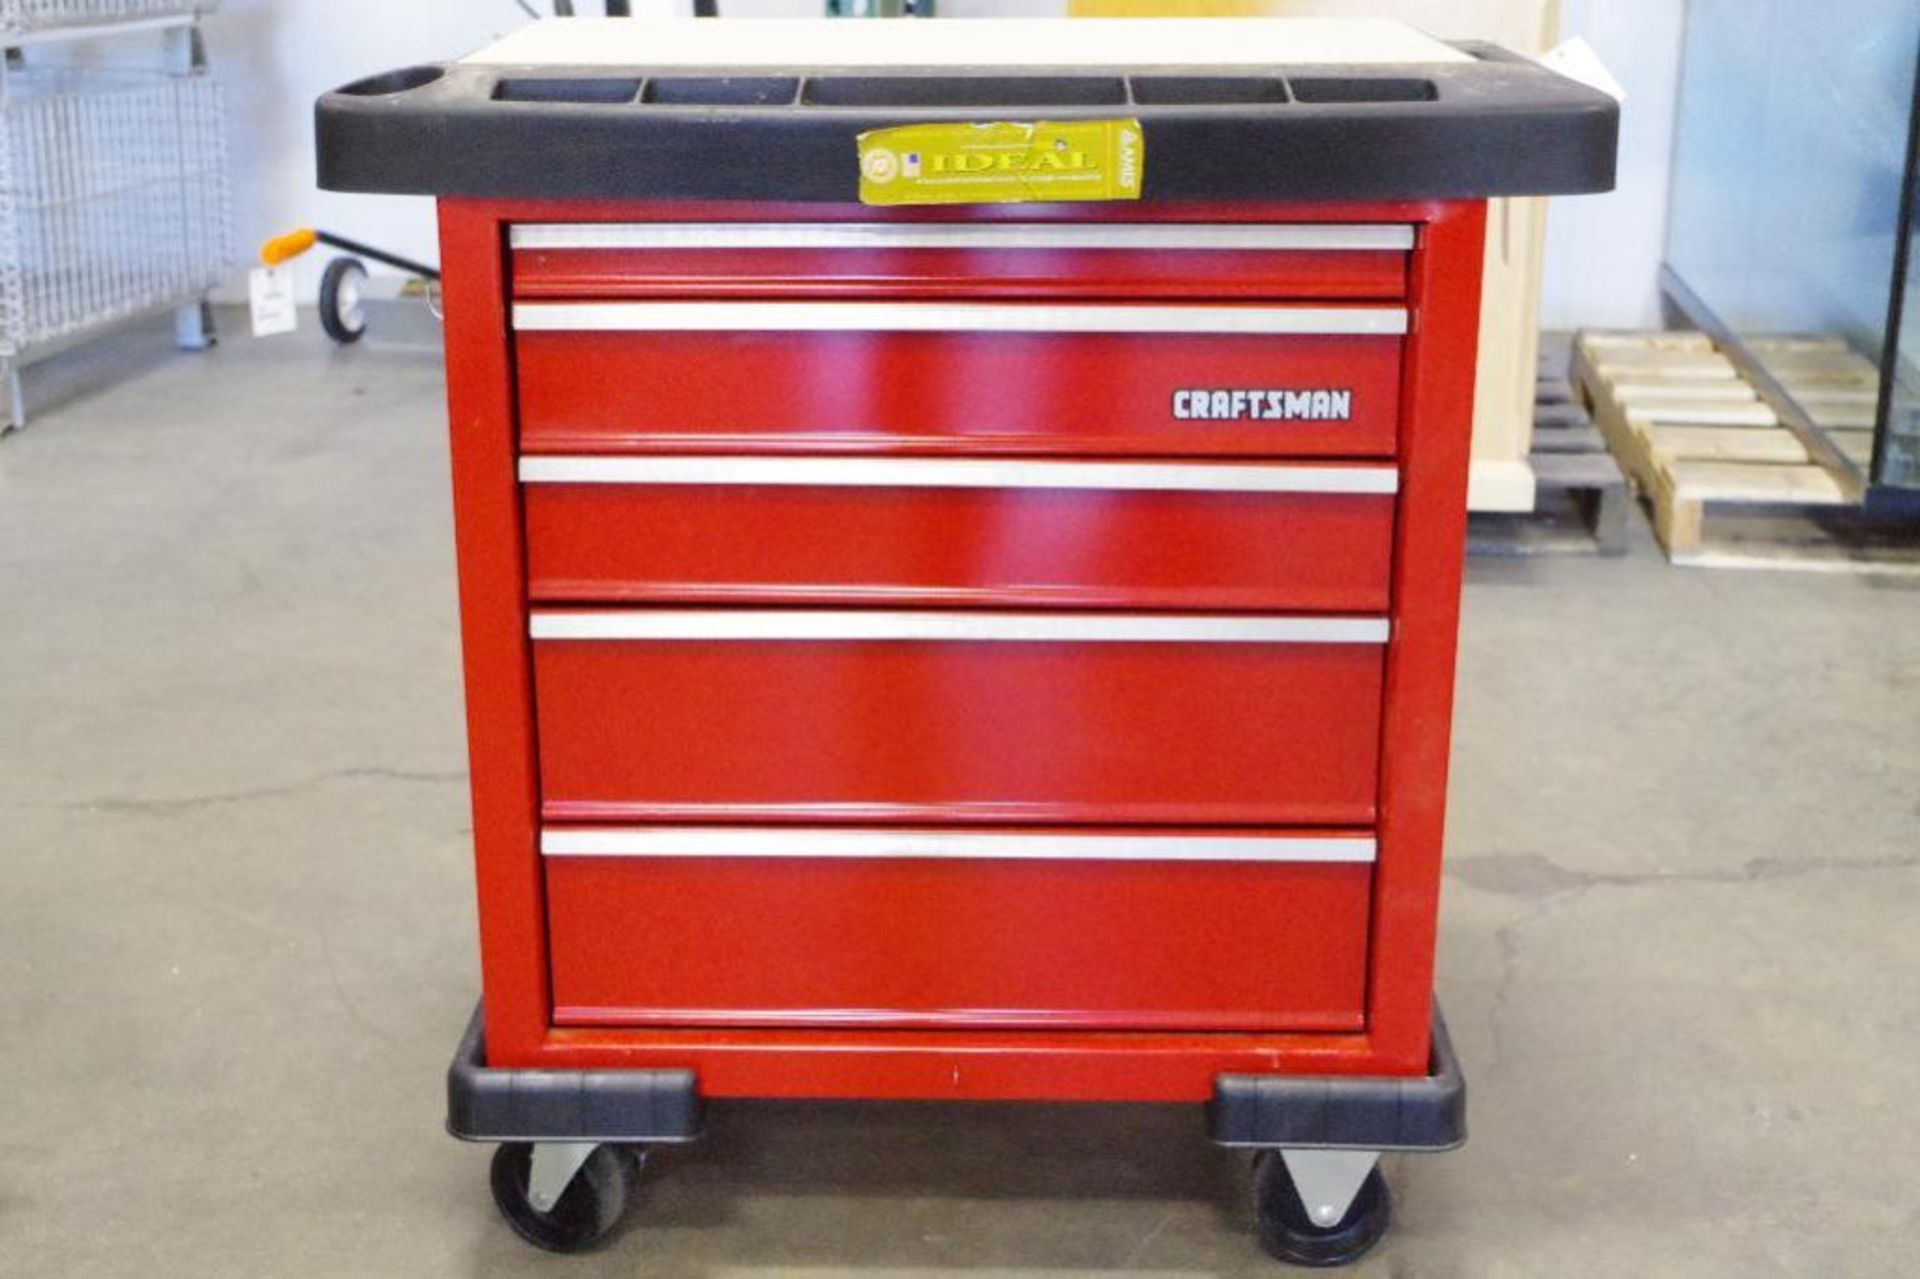 CRAFTSMAN 5-Drawer Rolling Tool Chest - Image 5 of 5